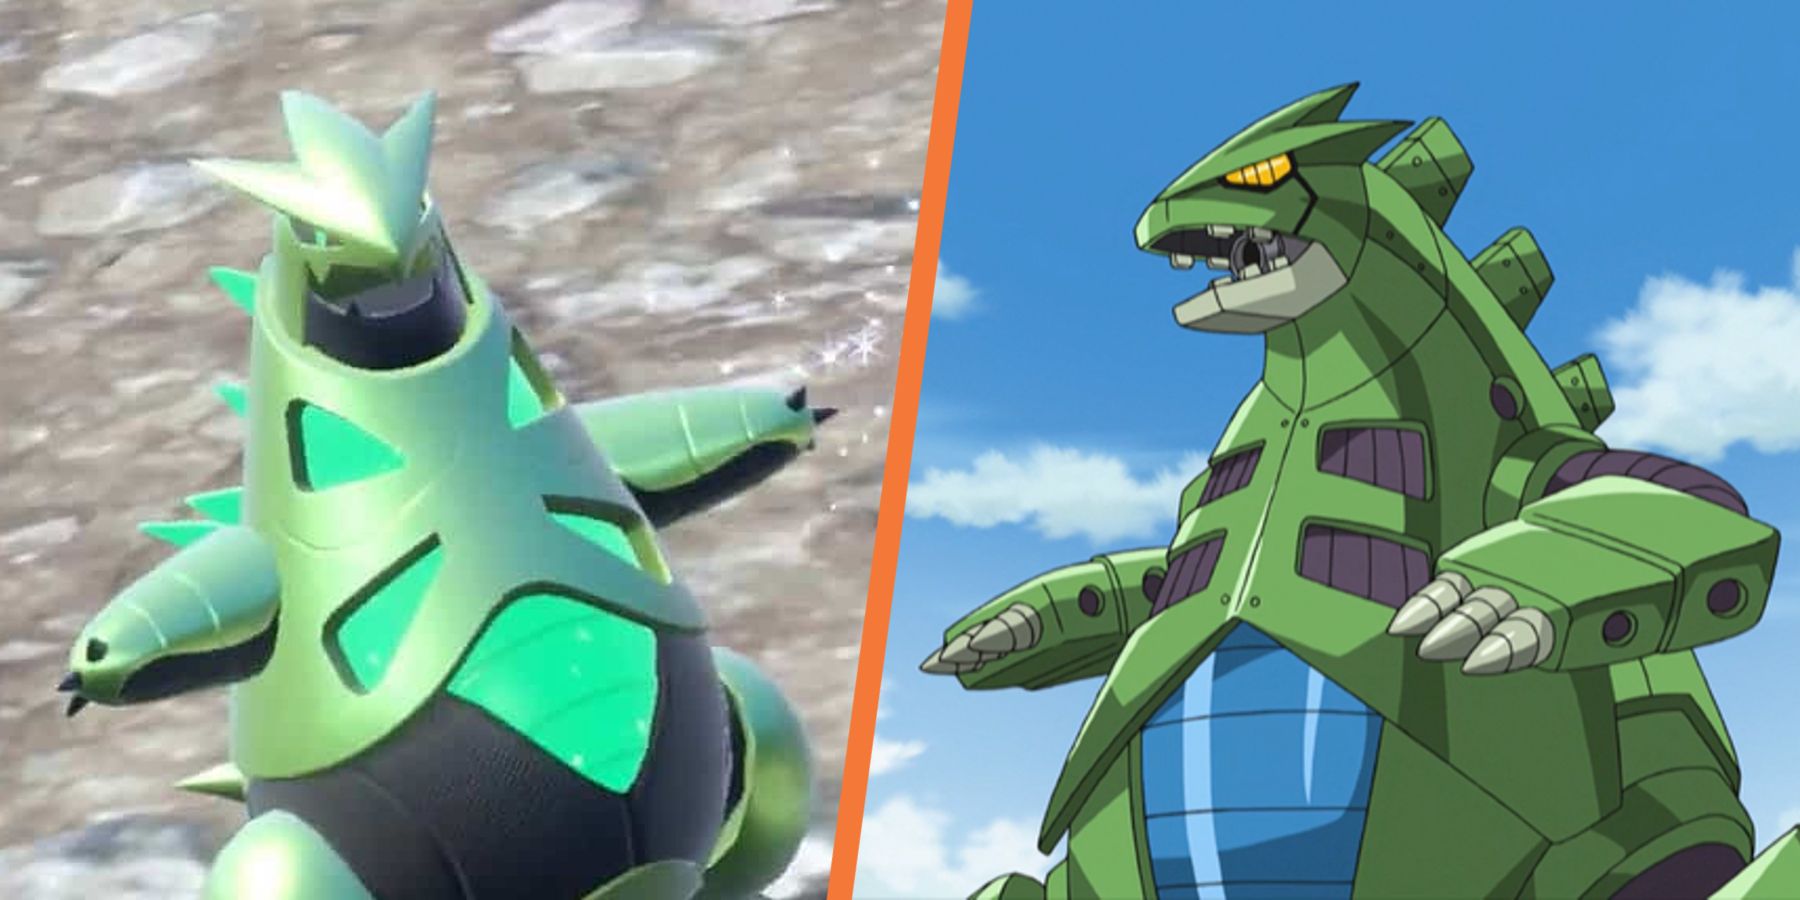 Pokemon Violet's Iron Thorns compared to Mecha Tyranitar introduced in Pokemon Black 2 and White 2